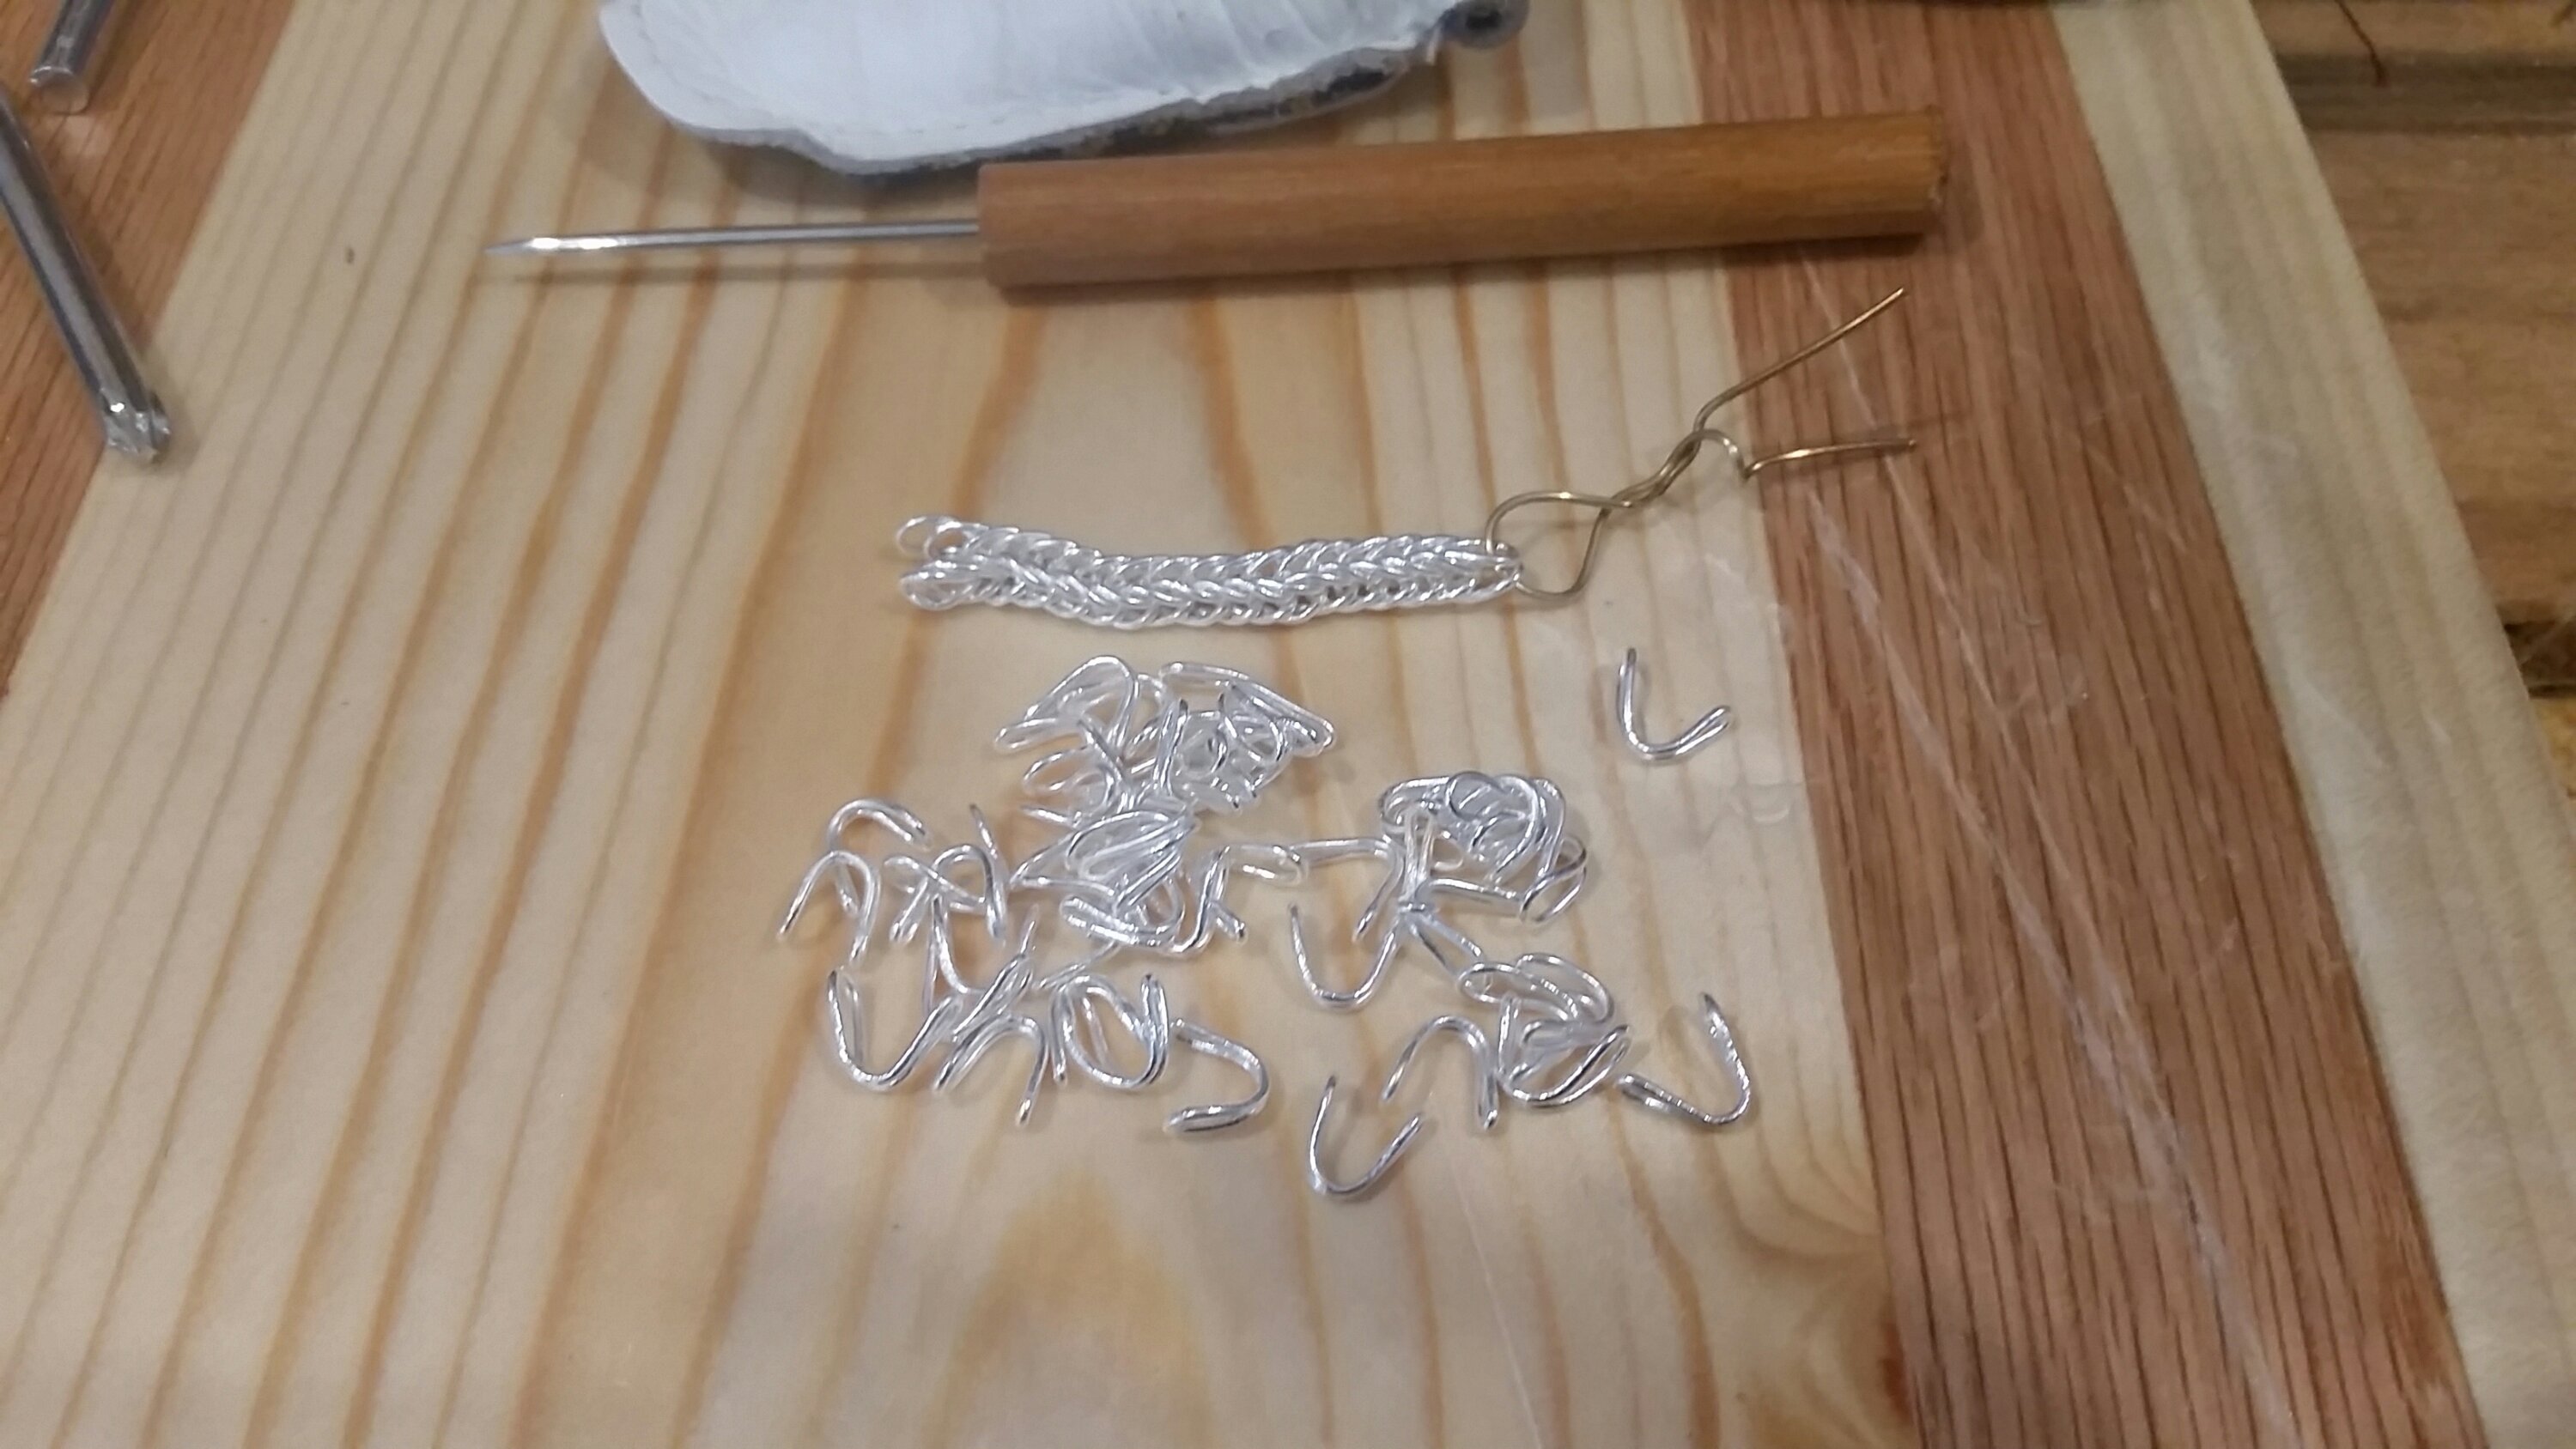 The start of a fine silver double loop-in-loop chain and some prepared links